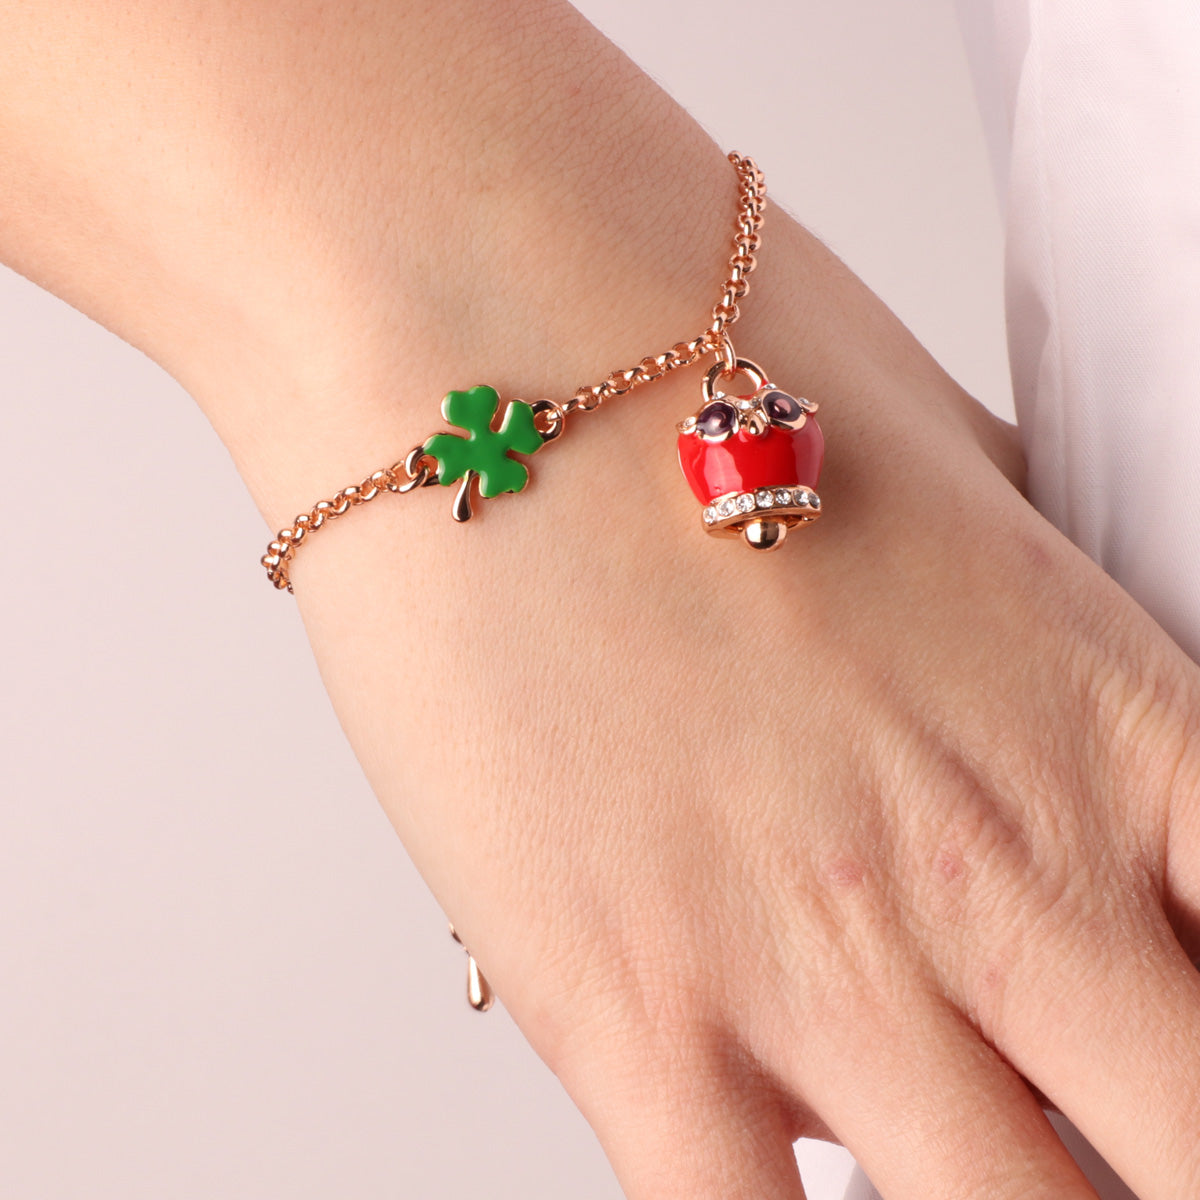 Metal bracelet with four -leaf clover and owl charming bell with red nail polish and white crystals